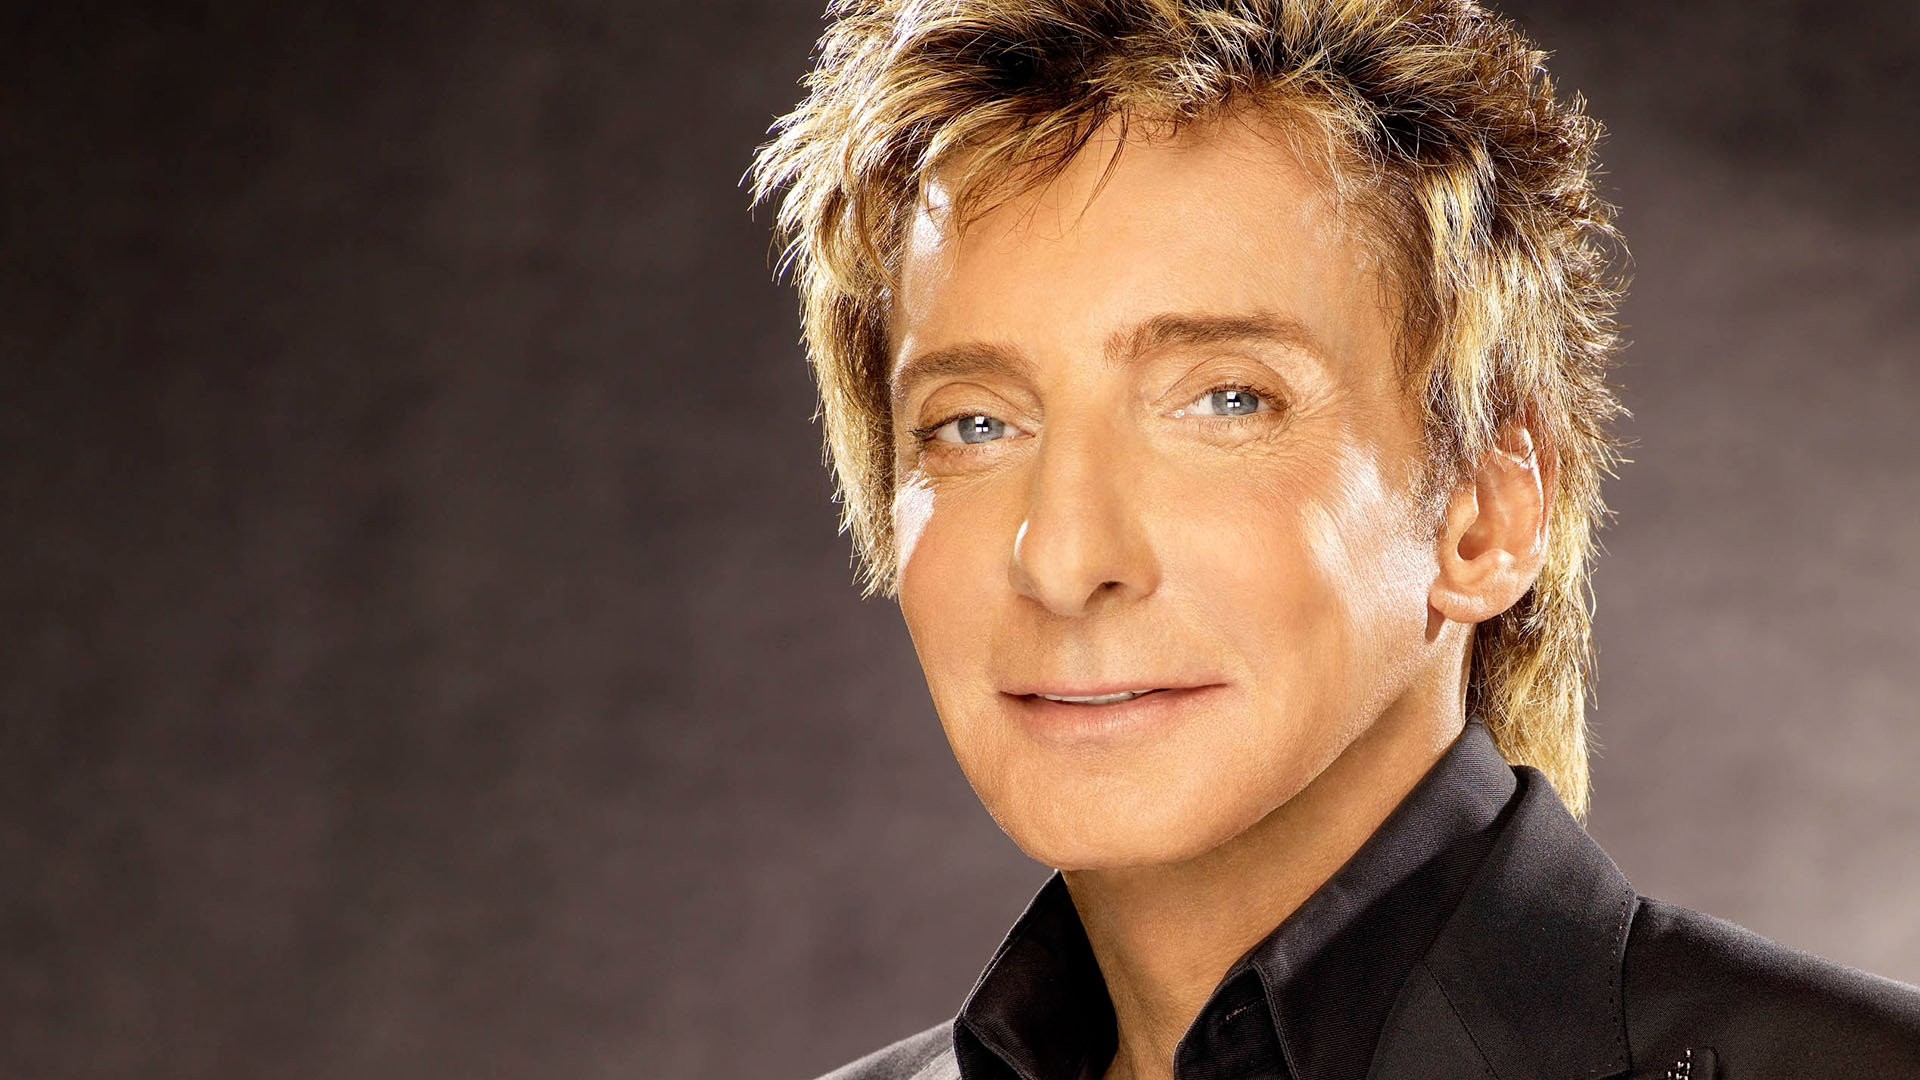 Barry Manilow announces he'll hit the road One Last Time That Eric Alper